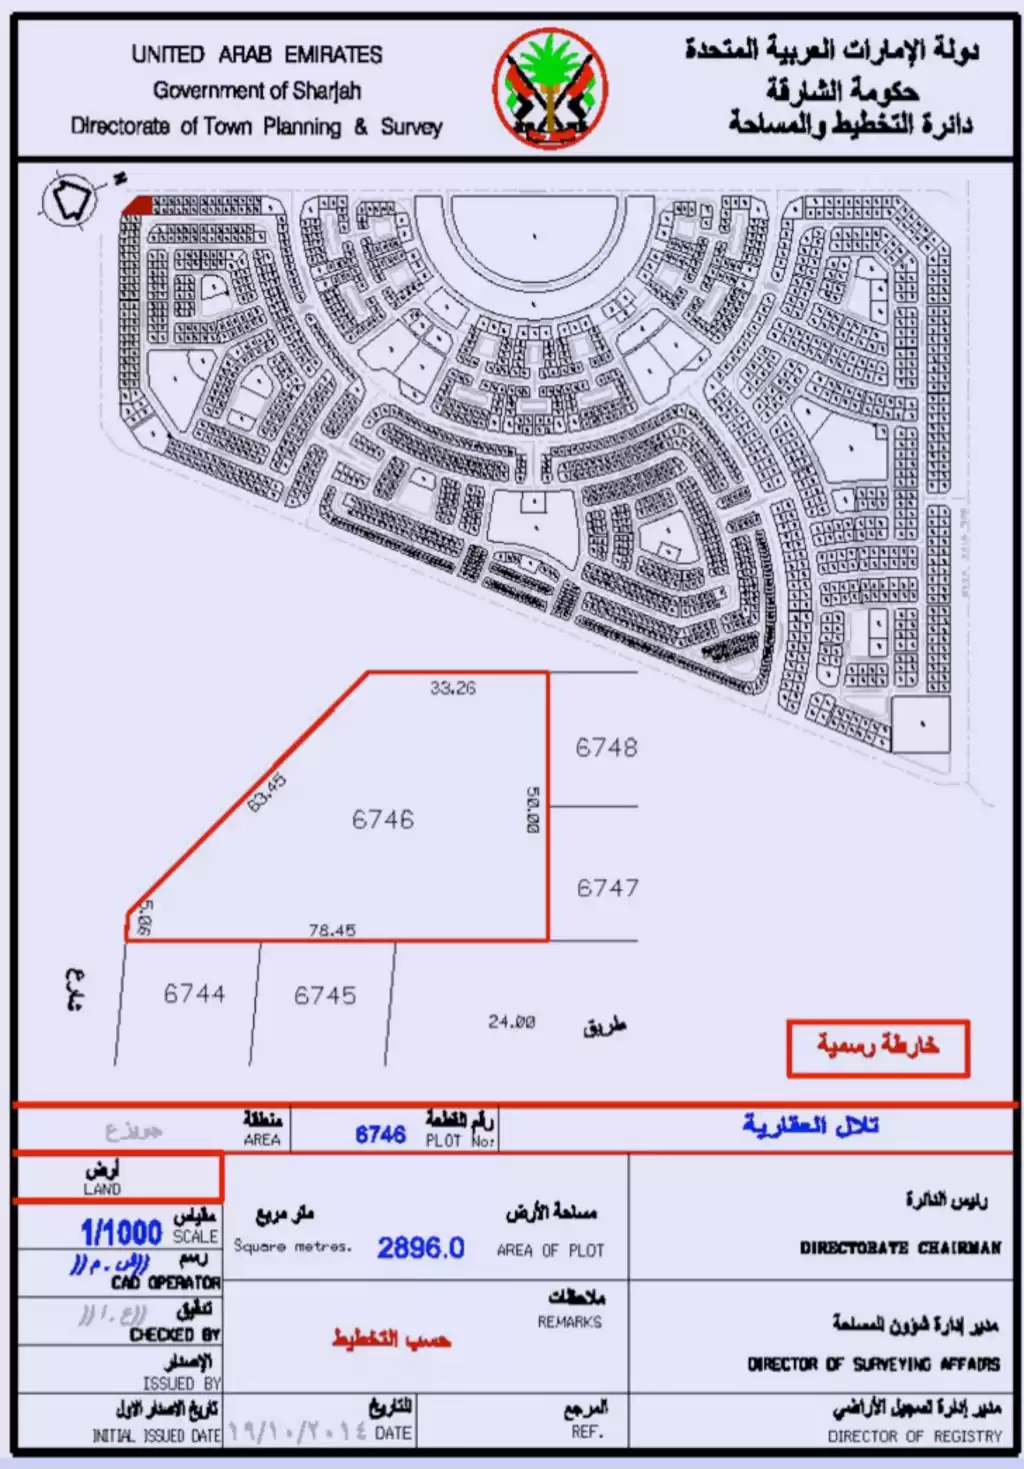 Land Off Plan Mixed Use Land  for sale in Al Seyouh , Sharjah #52623 - 1  image 